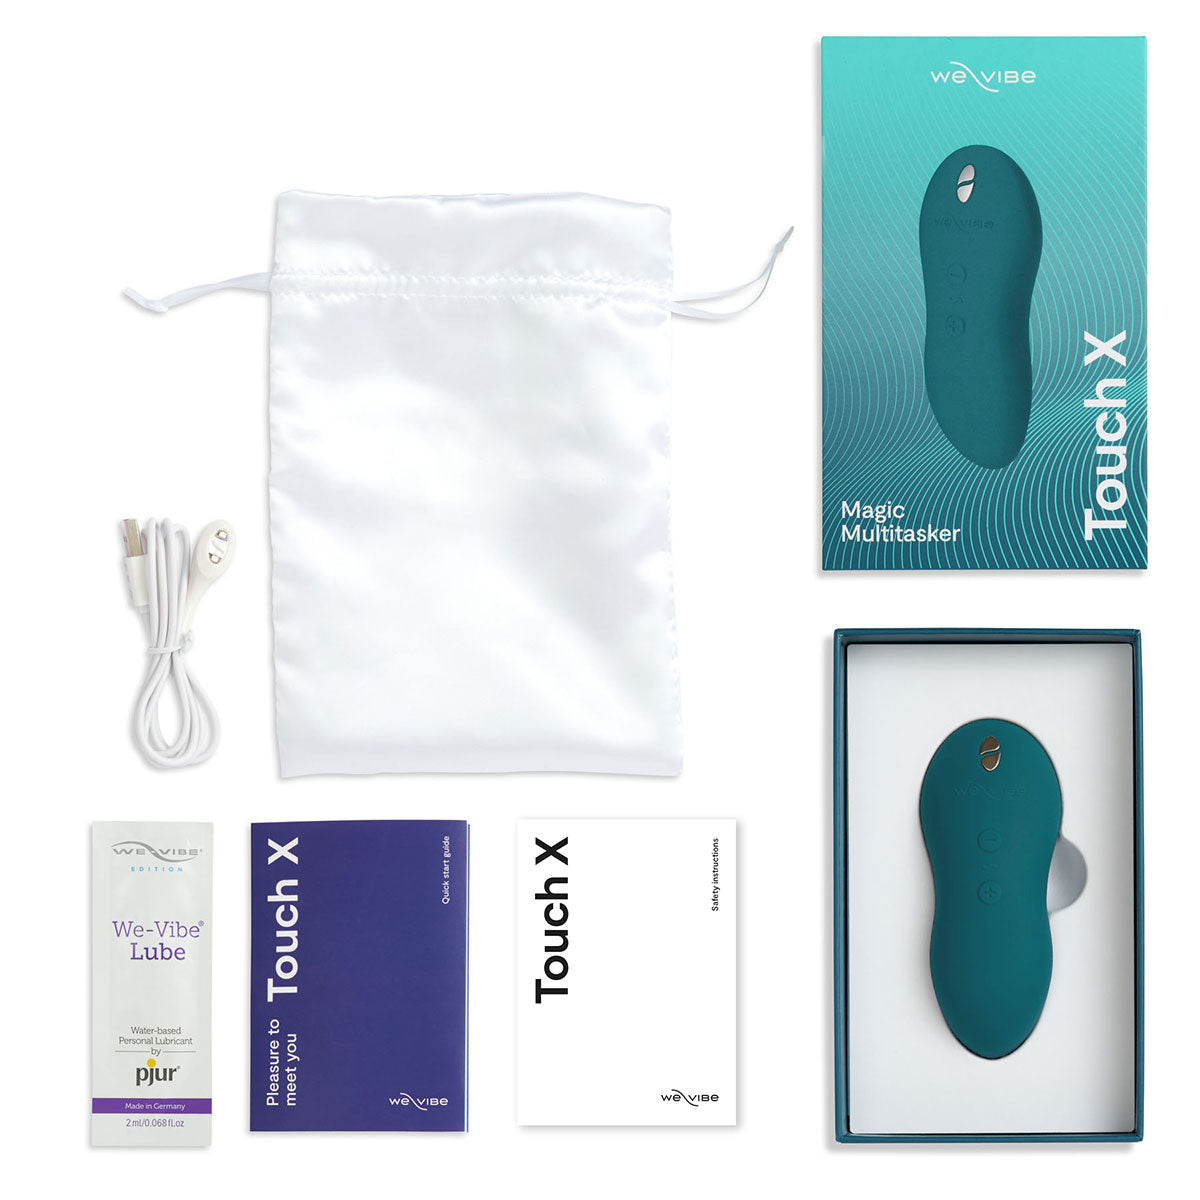 We-Vibe Touch X Vibrator Box Contents